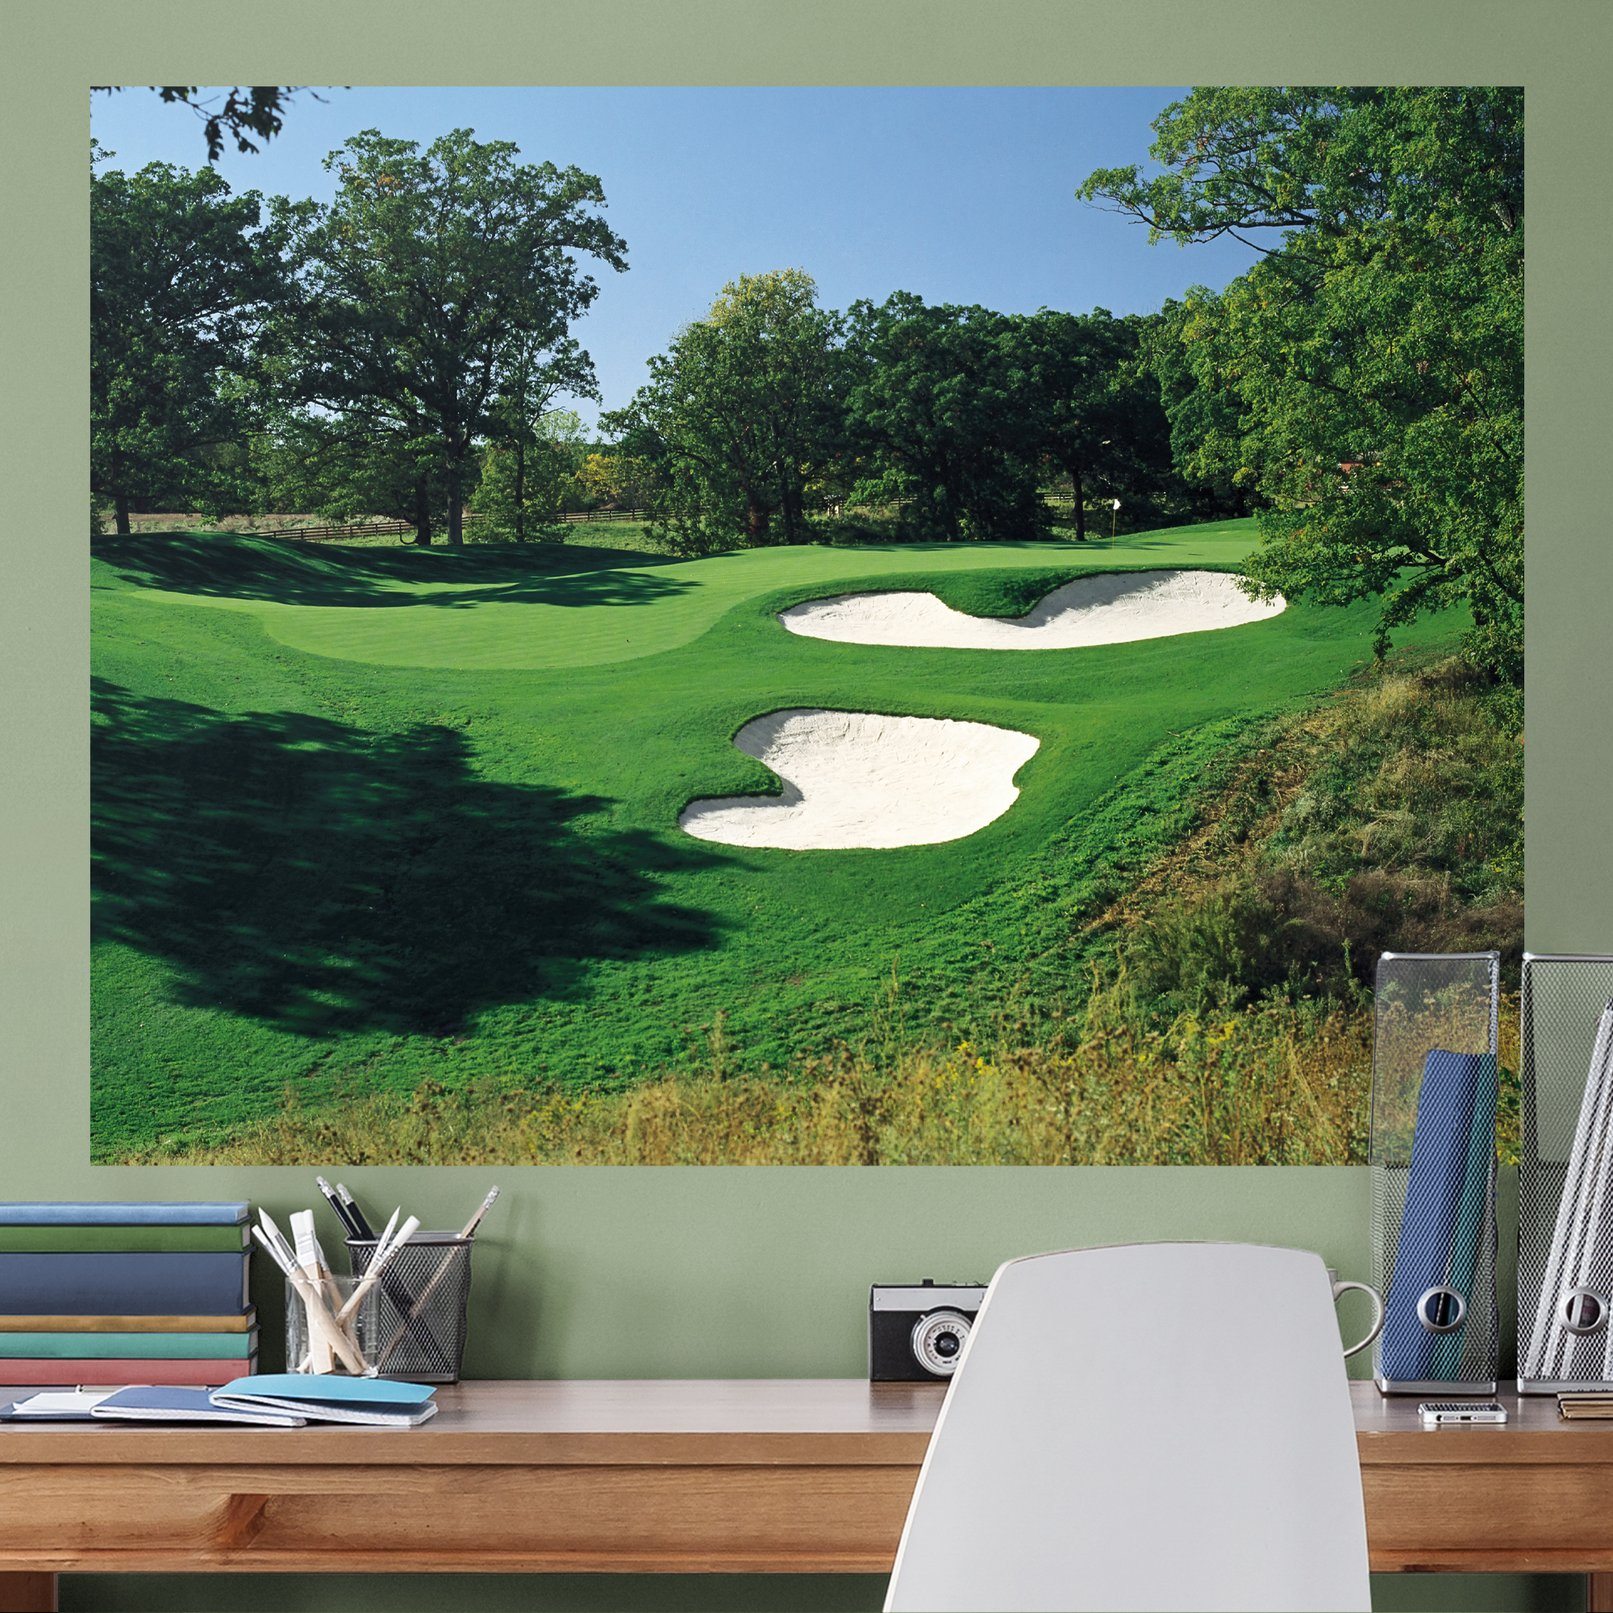 https://fathead.com/collections/golf/products/1025-00039